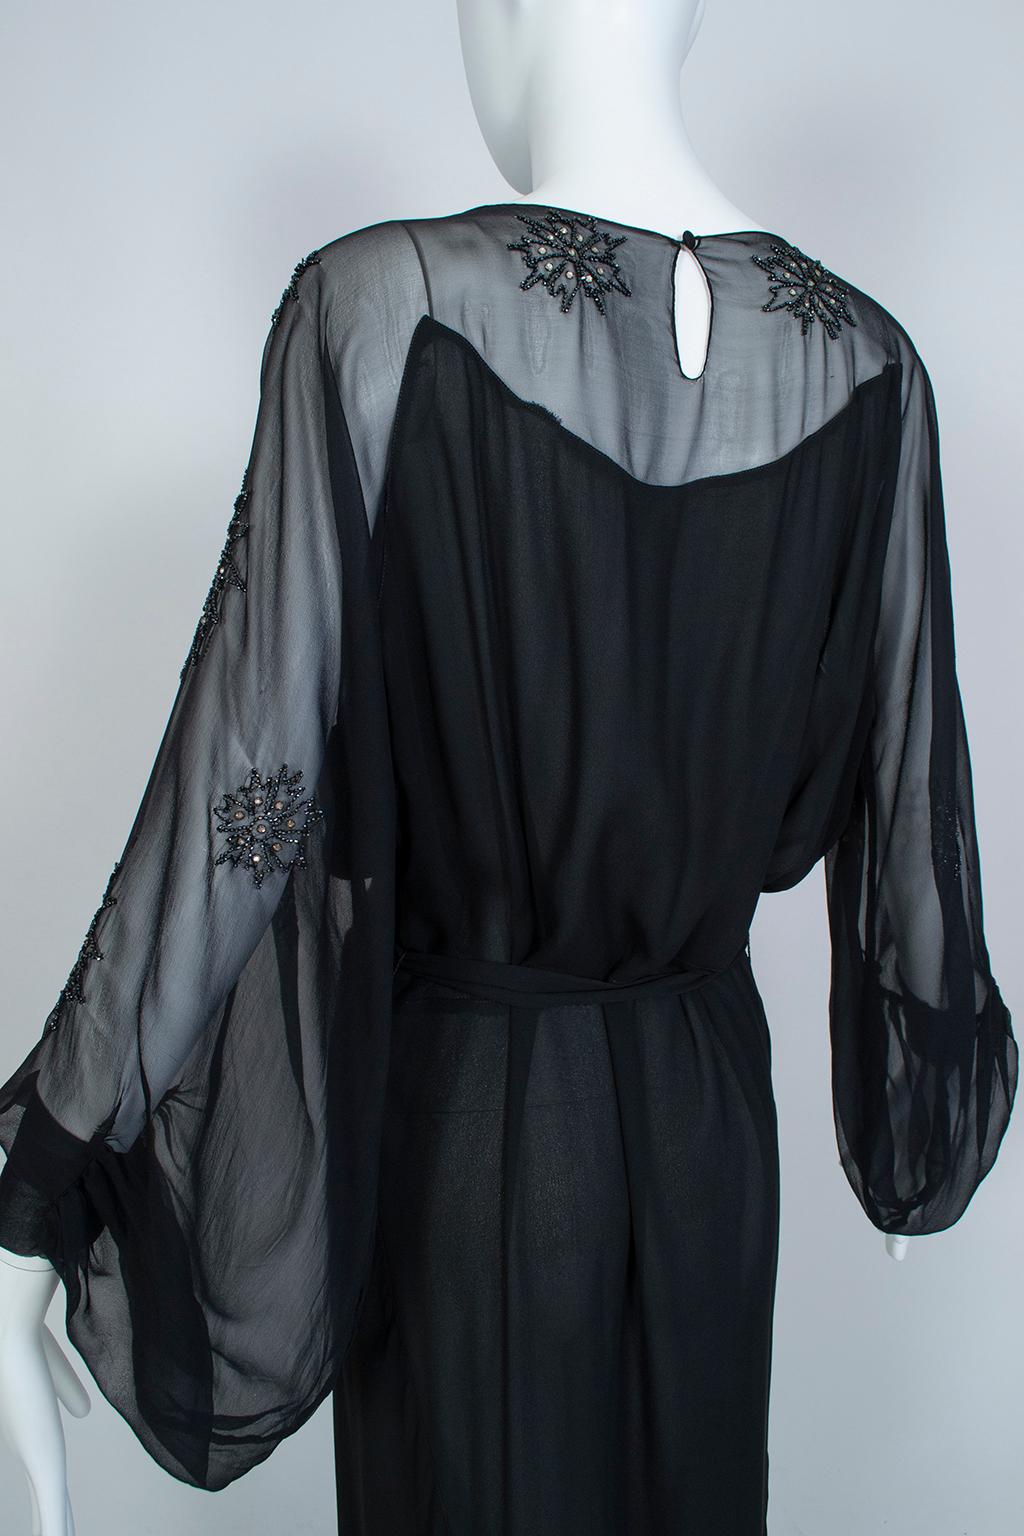 Women's Sheer Black Crystal Bead and Crêpe Illusion Gown with Bellows Sleeves - M, 1930s